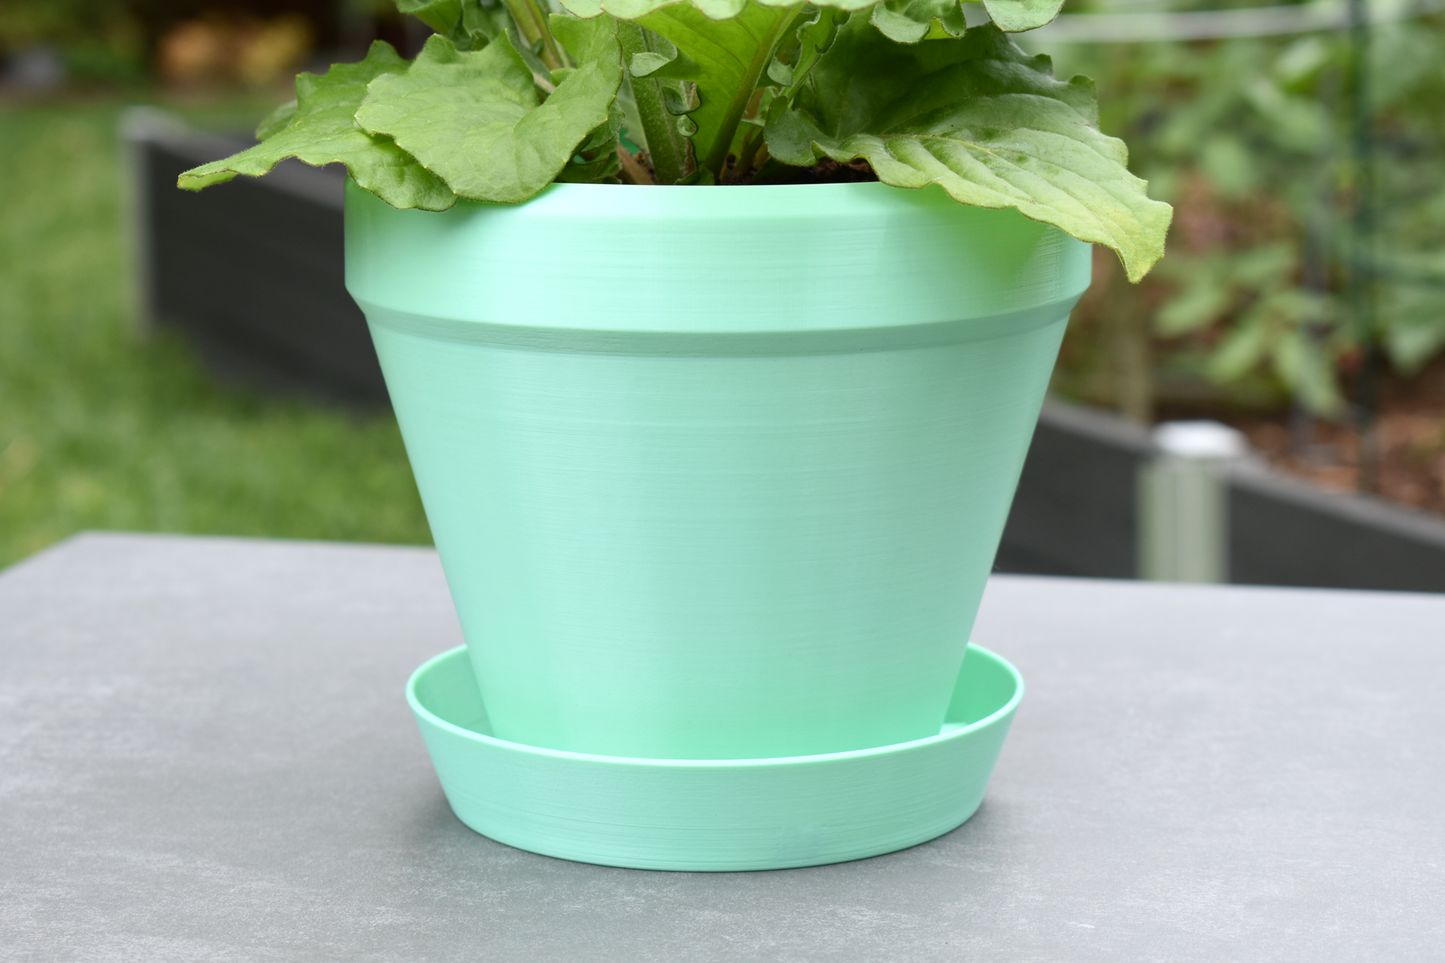 6-inch Colorful Flower Pot